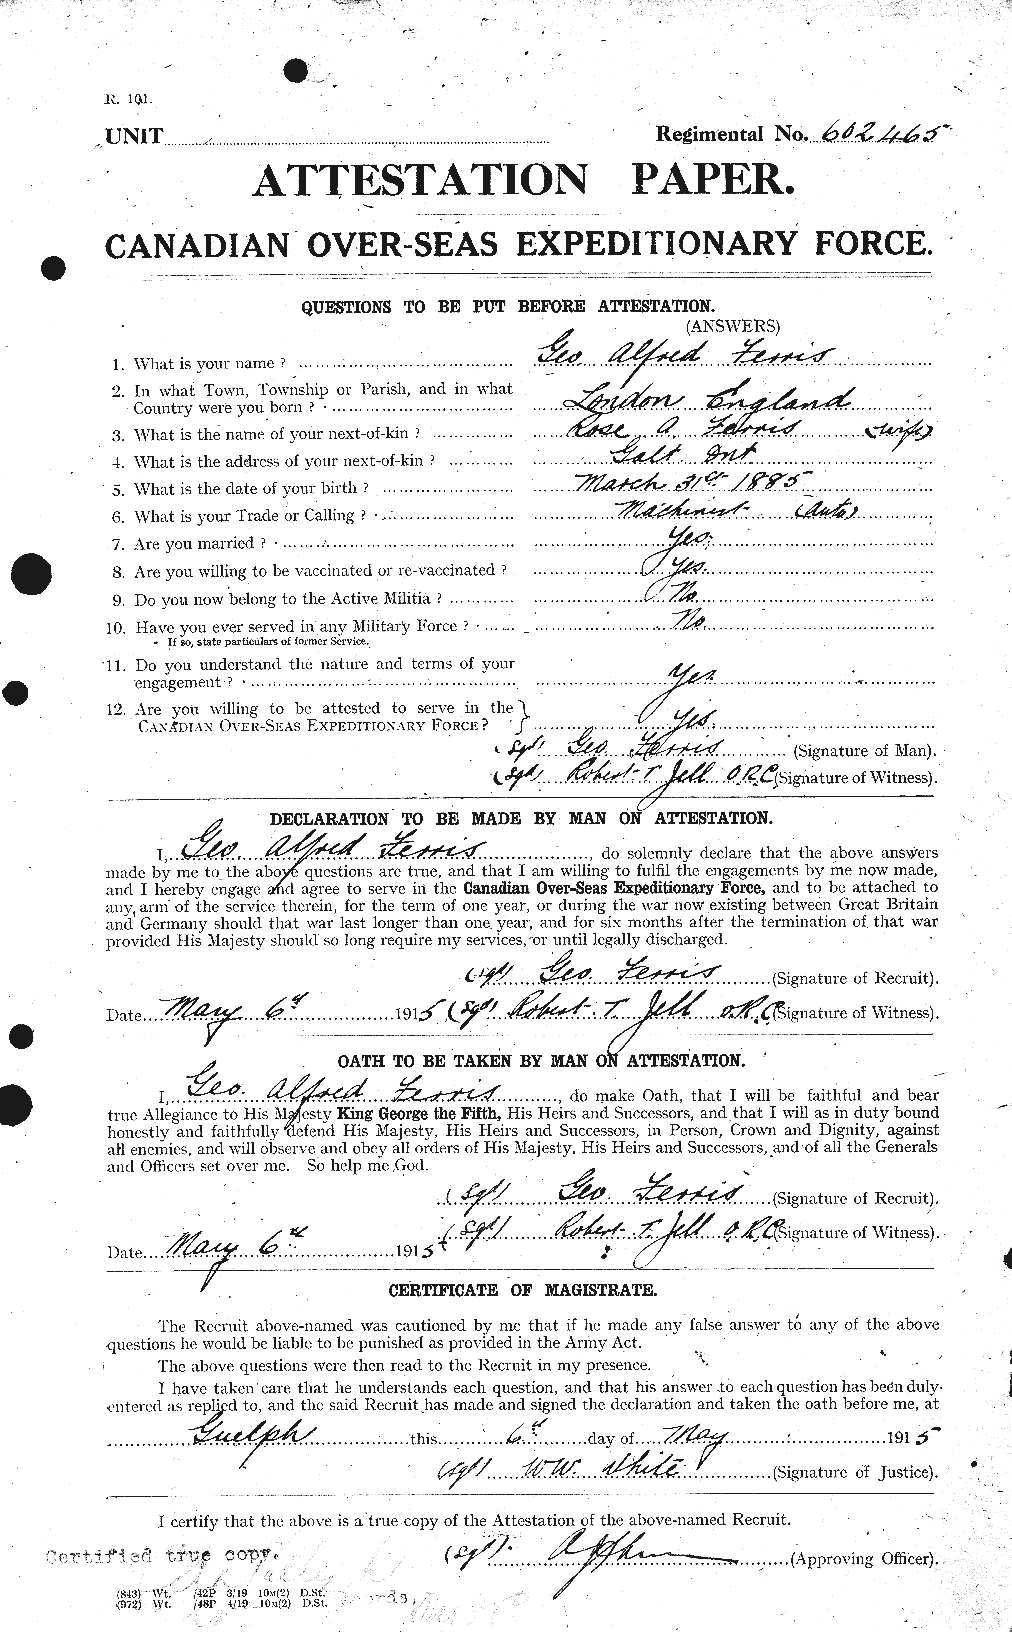 Personnel Records of the First World War - CEF 325182a